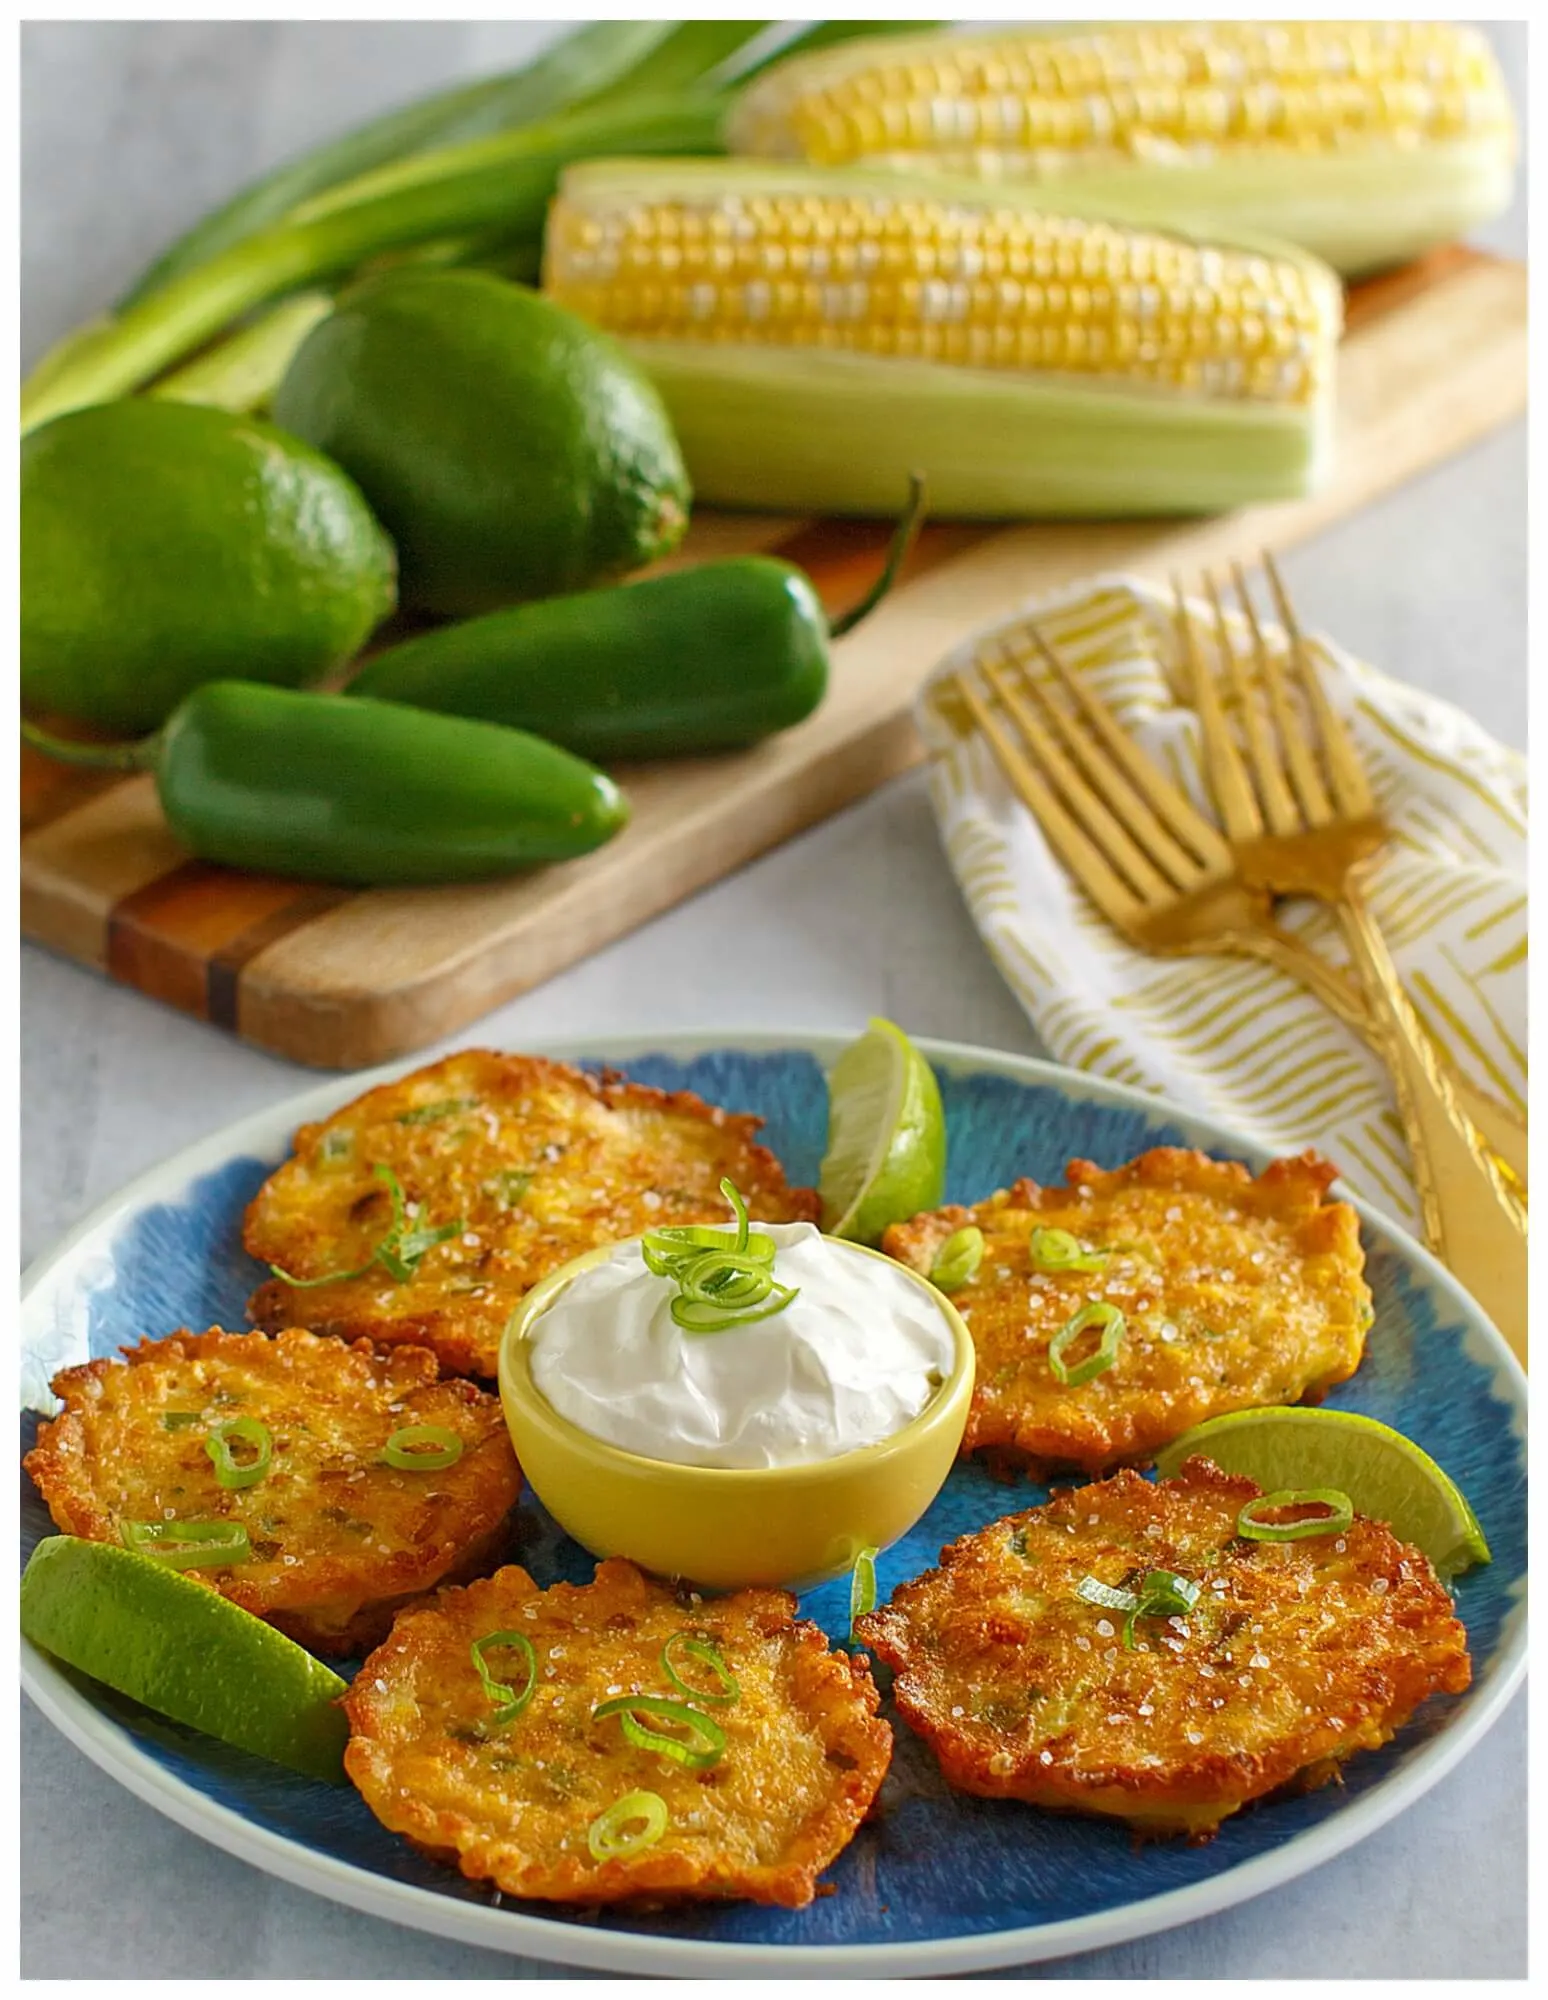 Parmesan Cheese Corn Fritters with fresh corn kernels